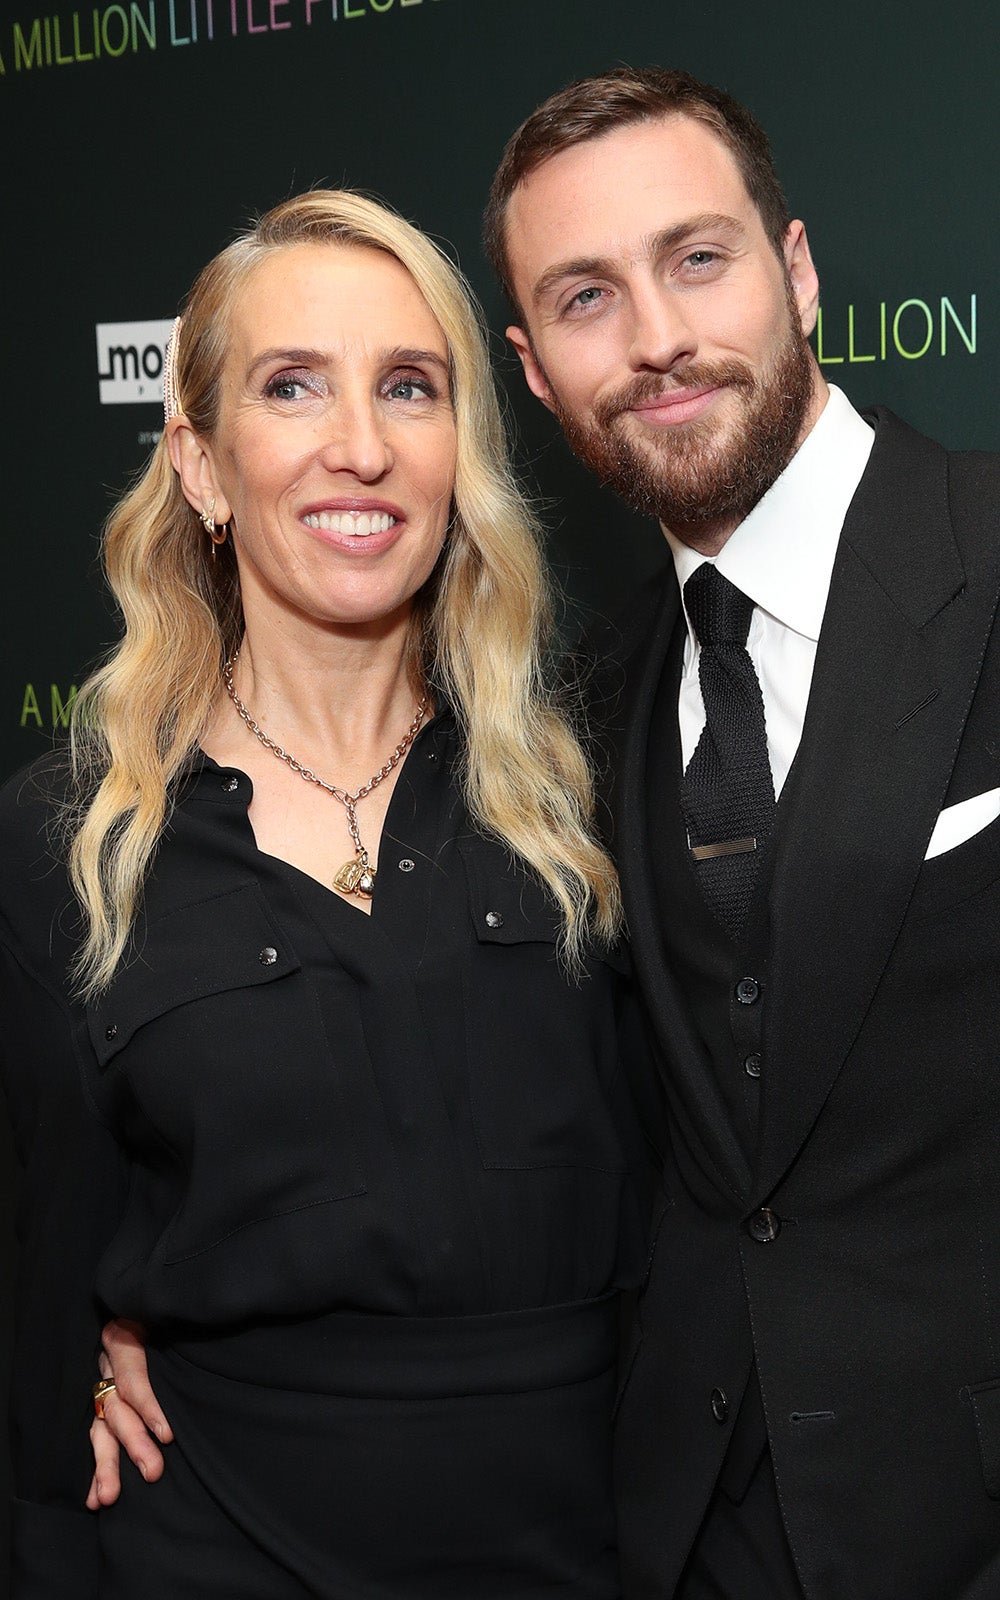 Sam Taylor-Johnson and Aaron Taylor-Johnson attend a film premiere in 2019